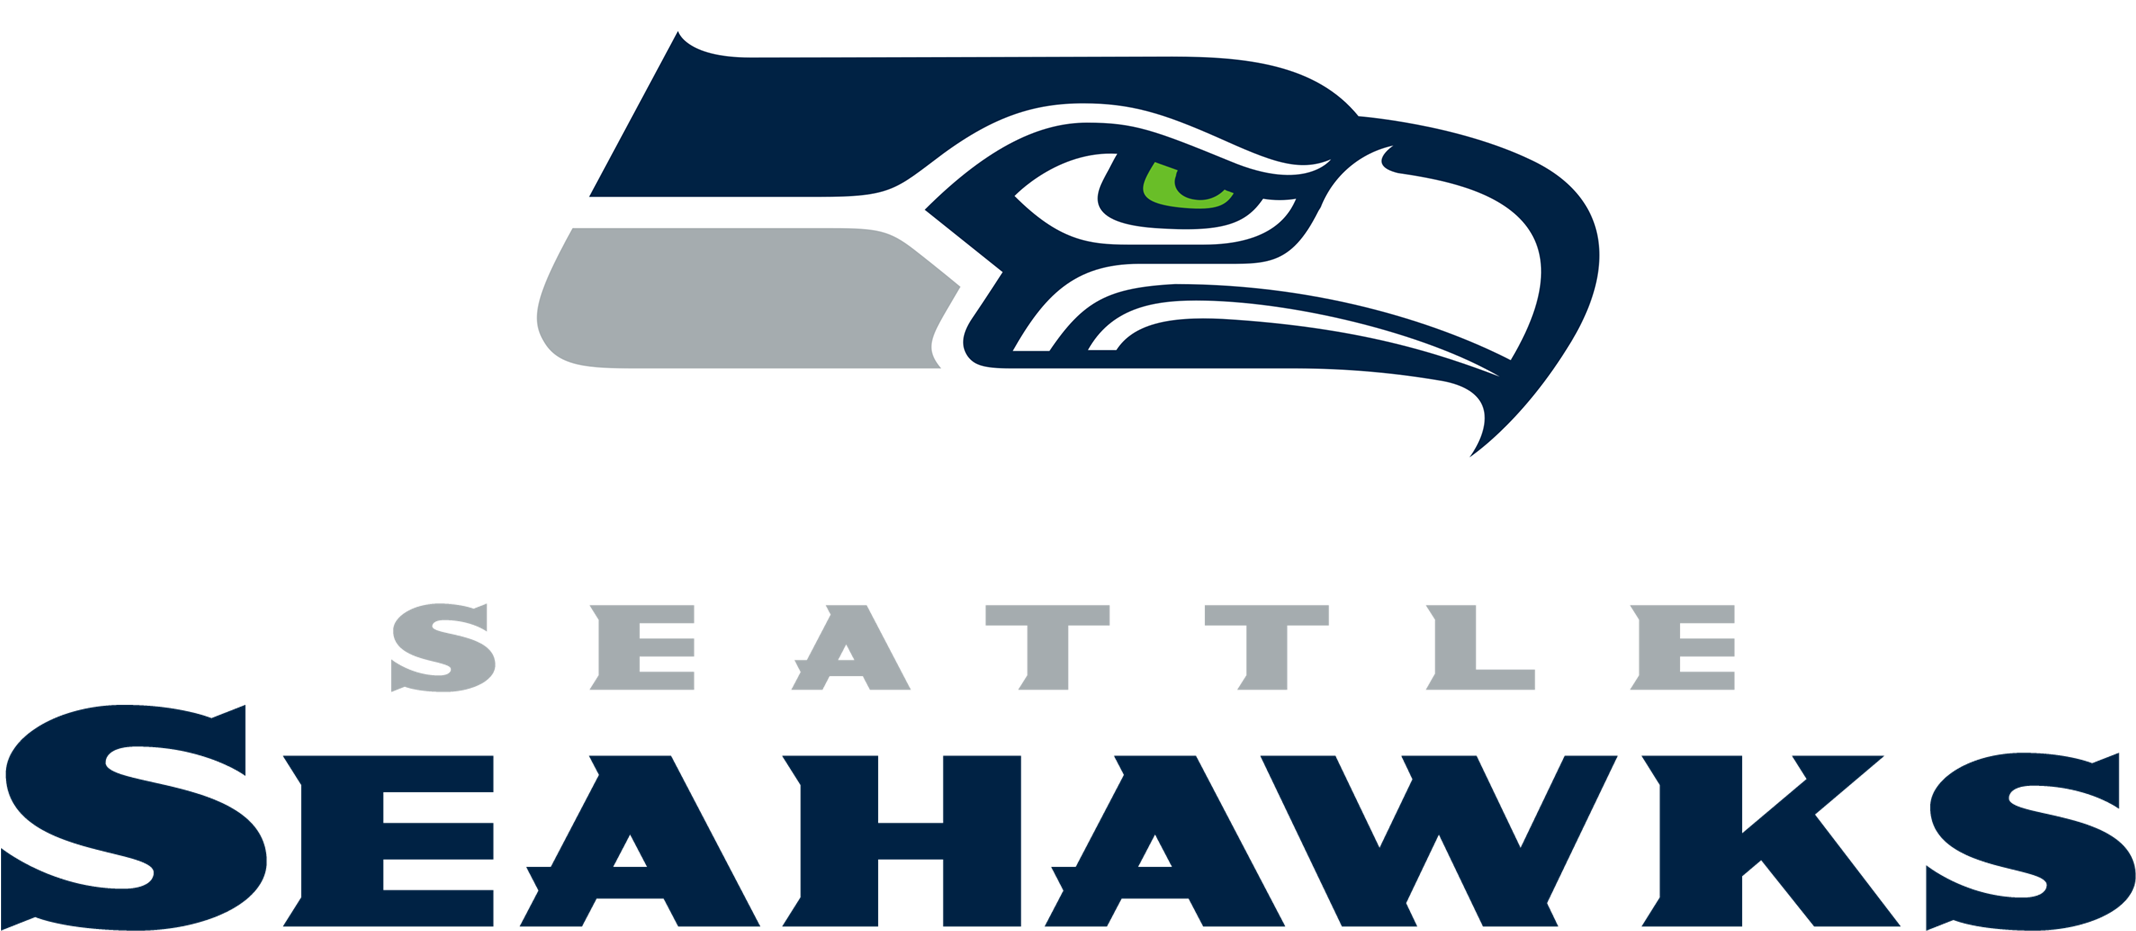 Seattle Seahawks Background PNG Image